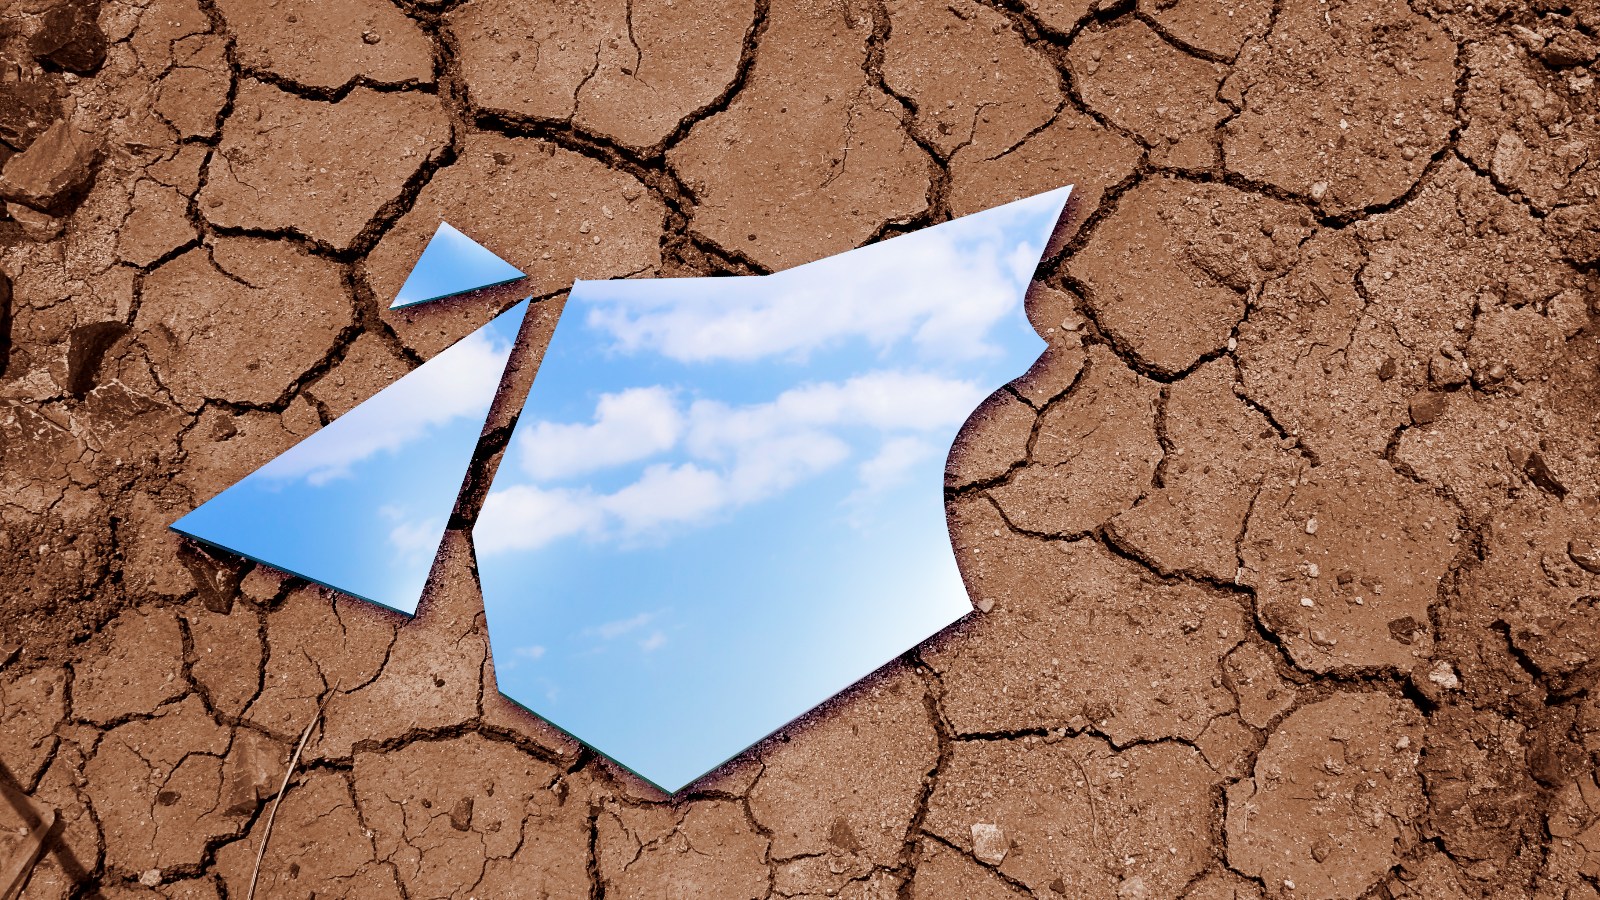 Photo of a shattered mirror placed on dry, cracked soil reflecting a blue sky